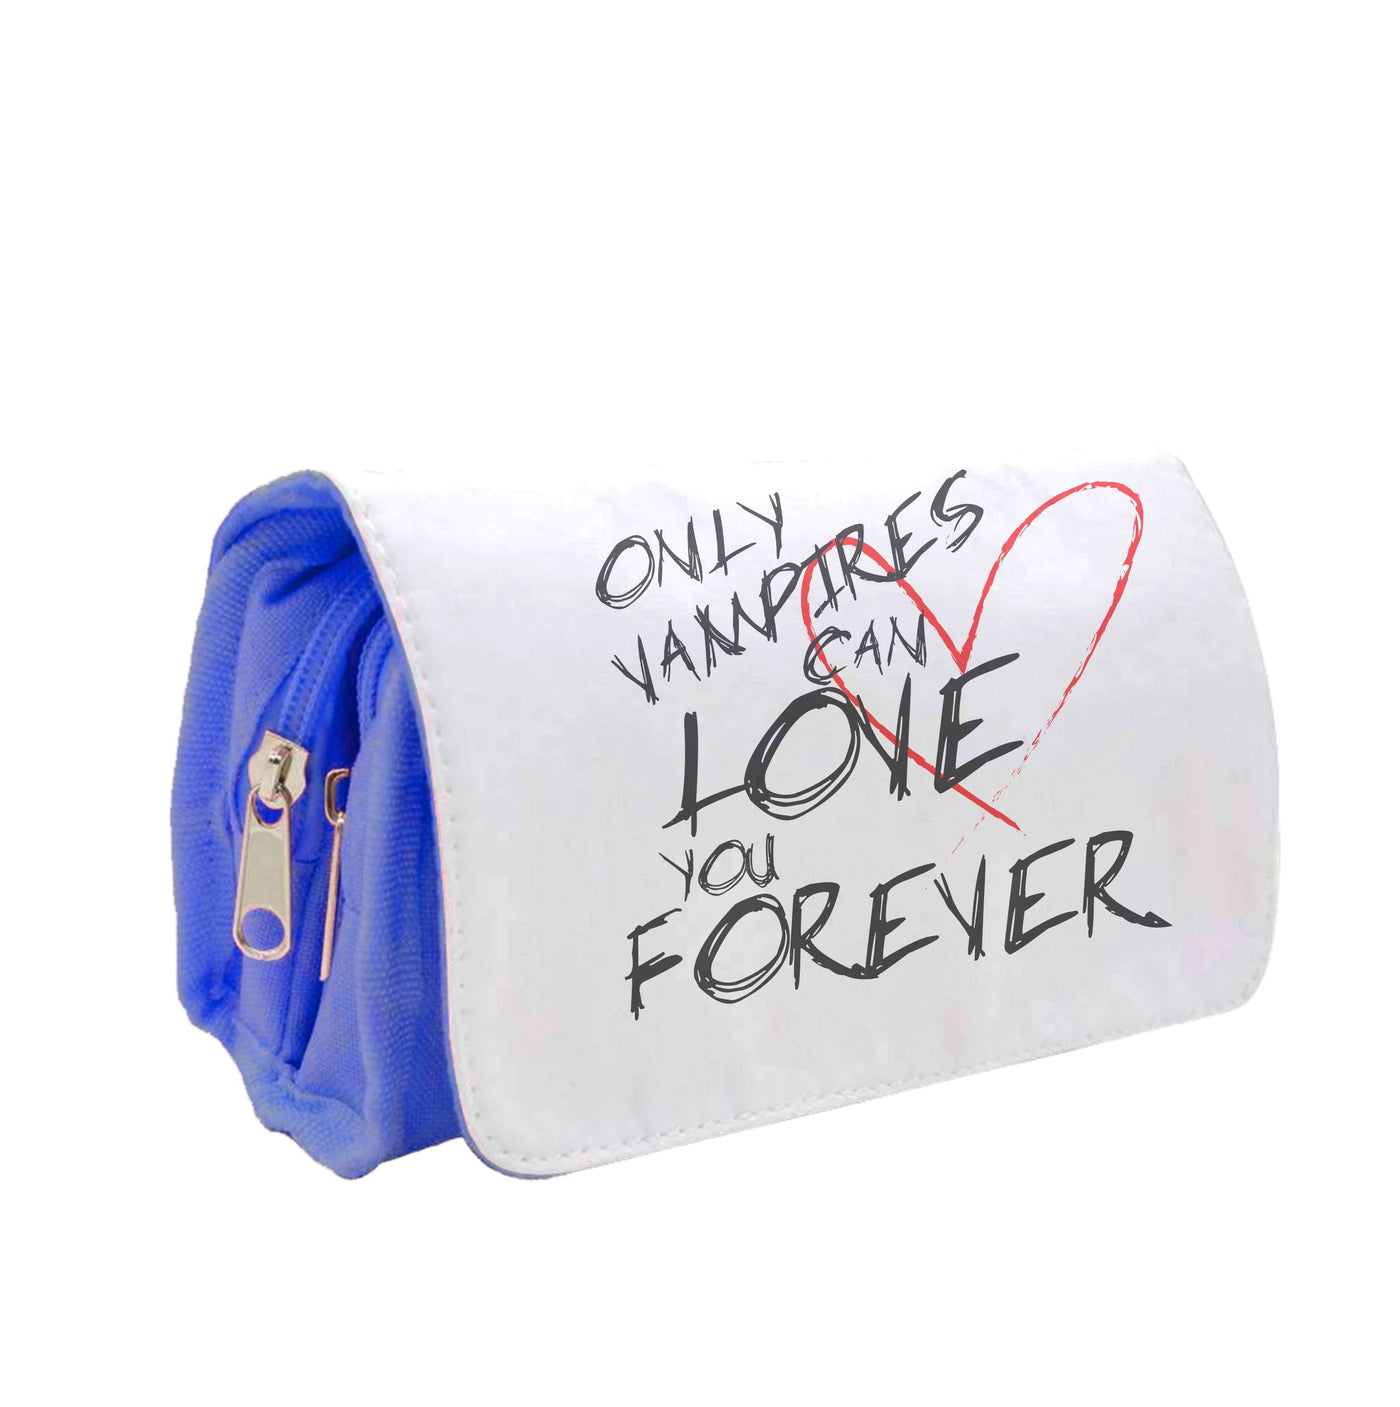 Only Vampires Can Love You Forever - Vampire Diaries Pencil Case